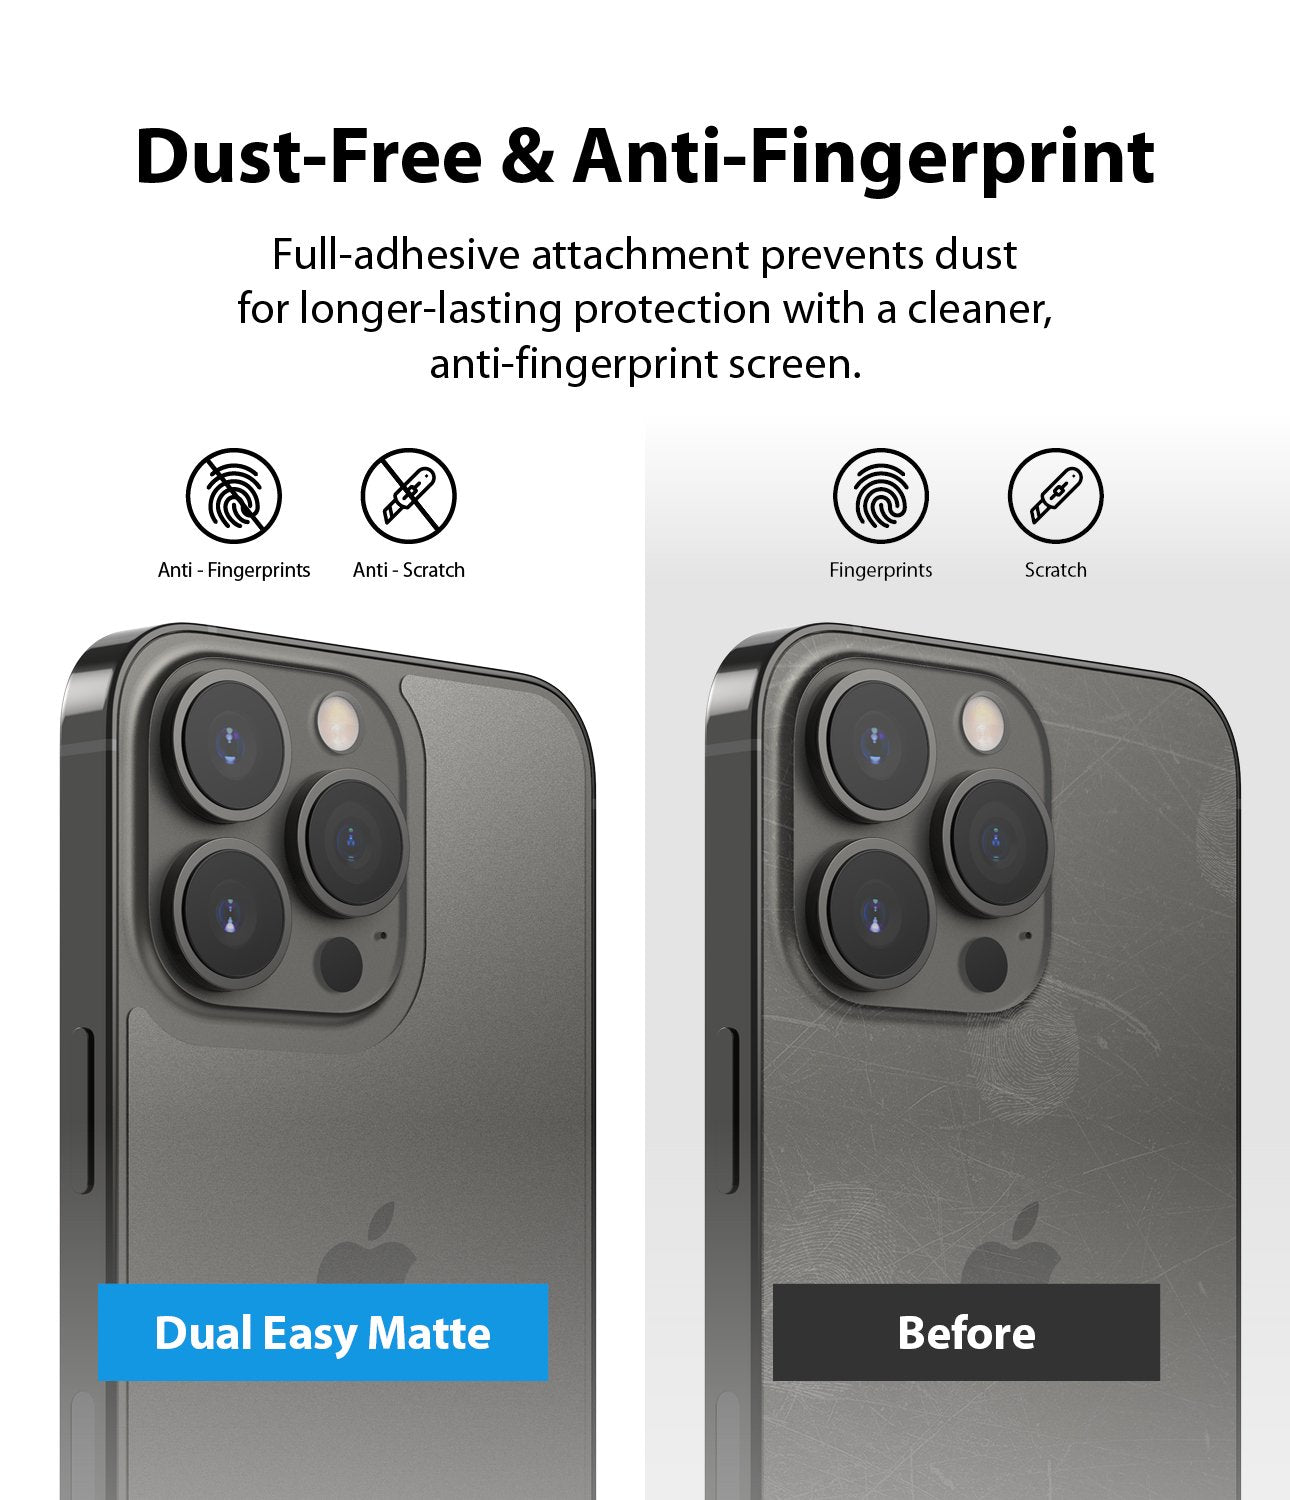 iPhone 13 Pro Max Back Screen Protector | Invisible Defender - Dust-Free & Anti-Fingerprint